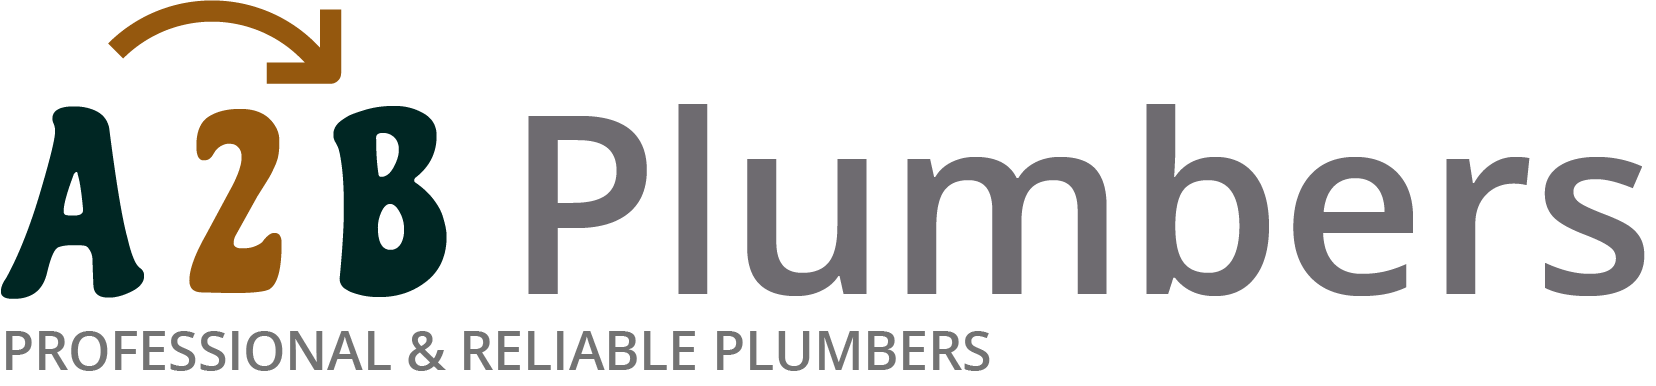 If you need a boiler installed, a radiator repaired or a leaking tap fixed, call us now - we provide services for properties in Ripon and the local area.